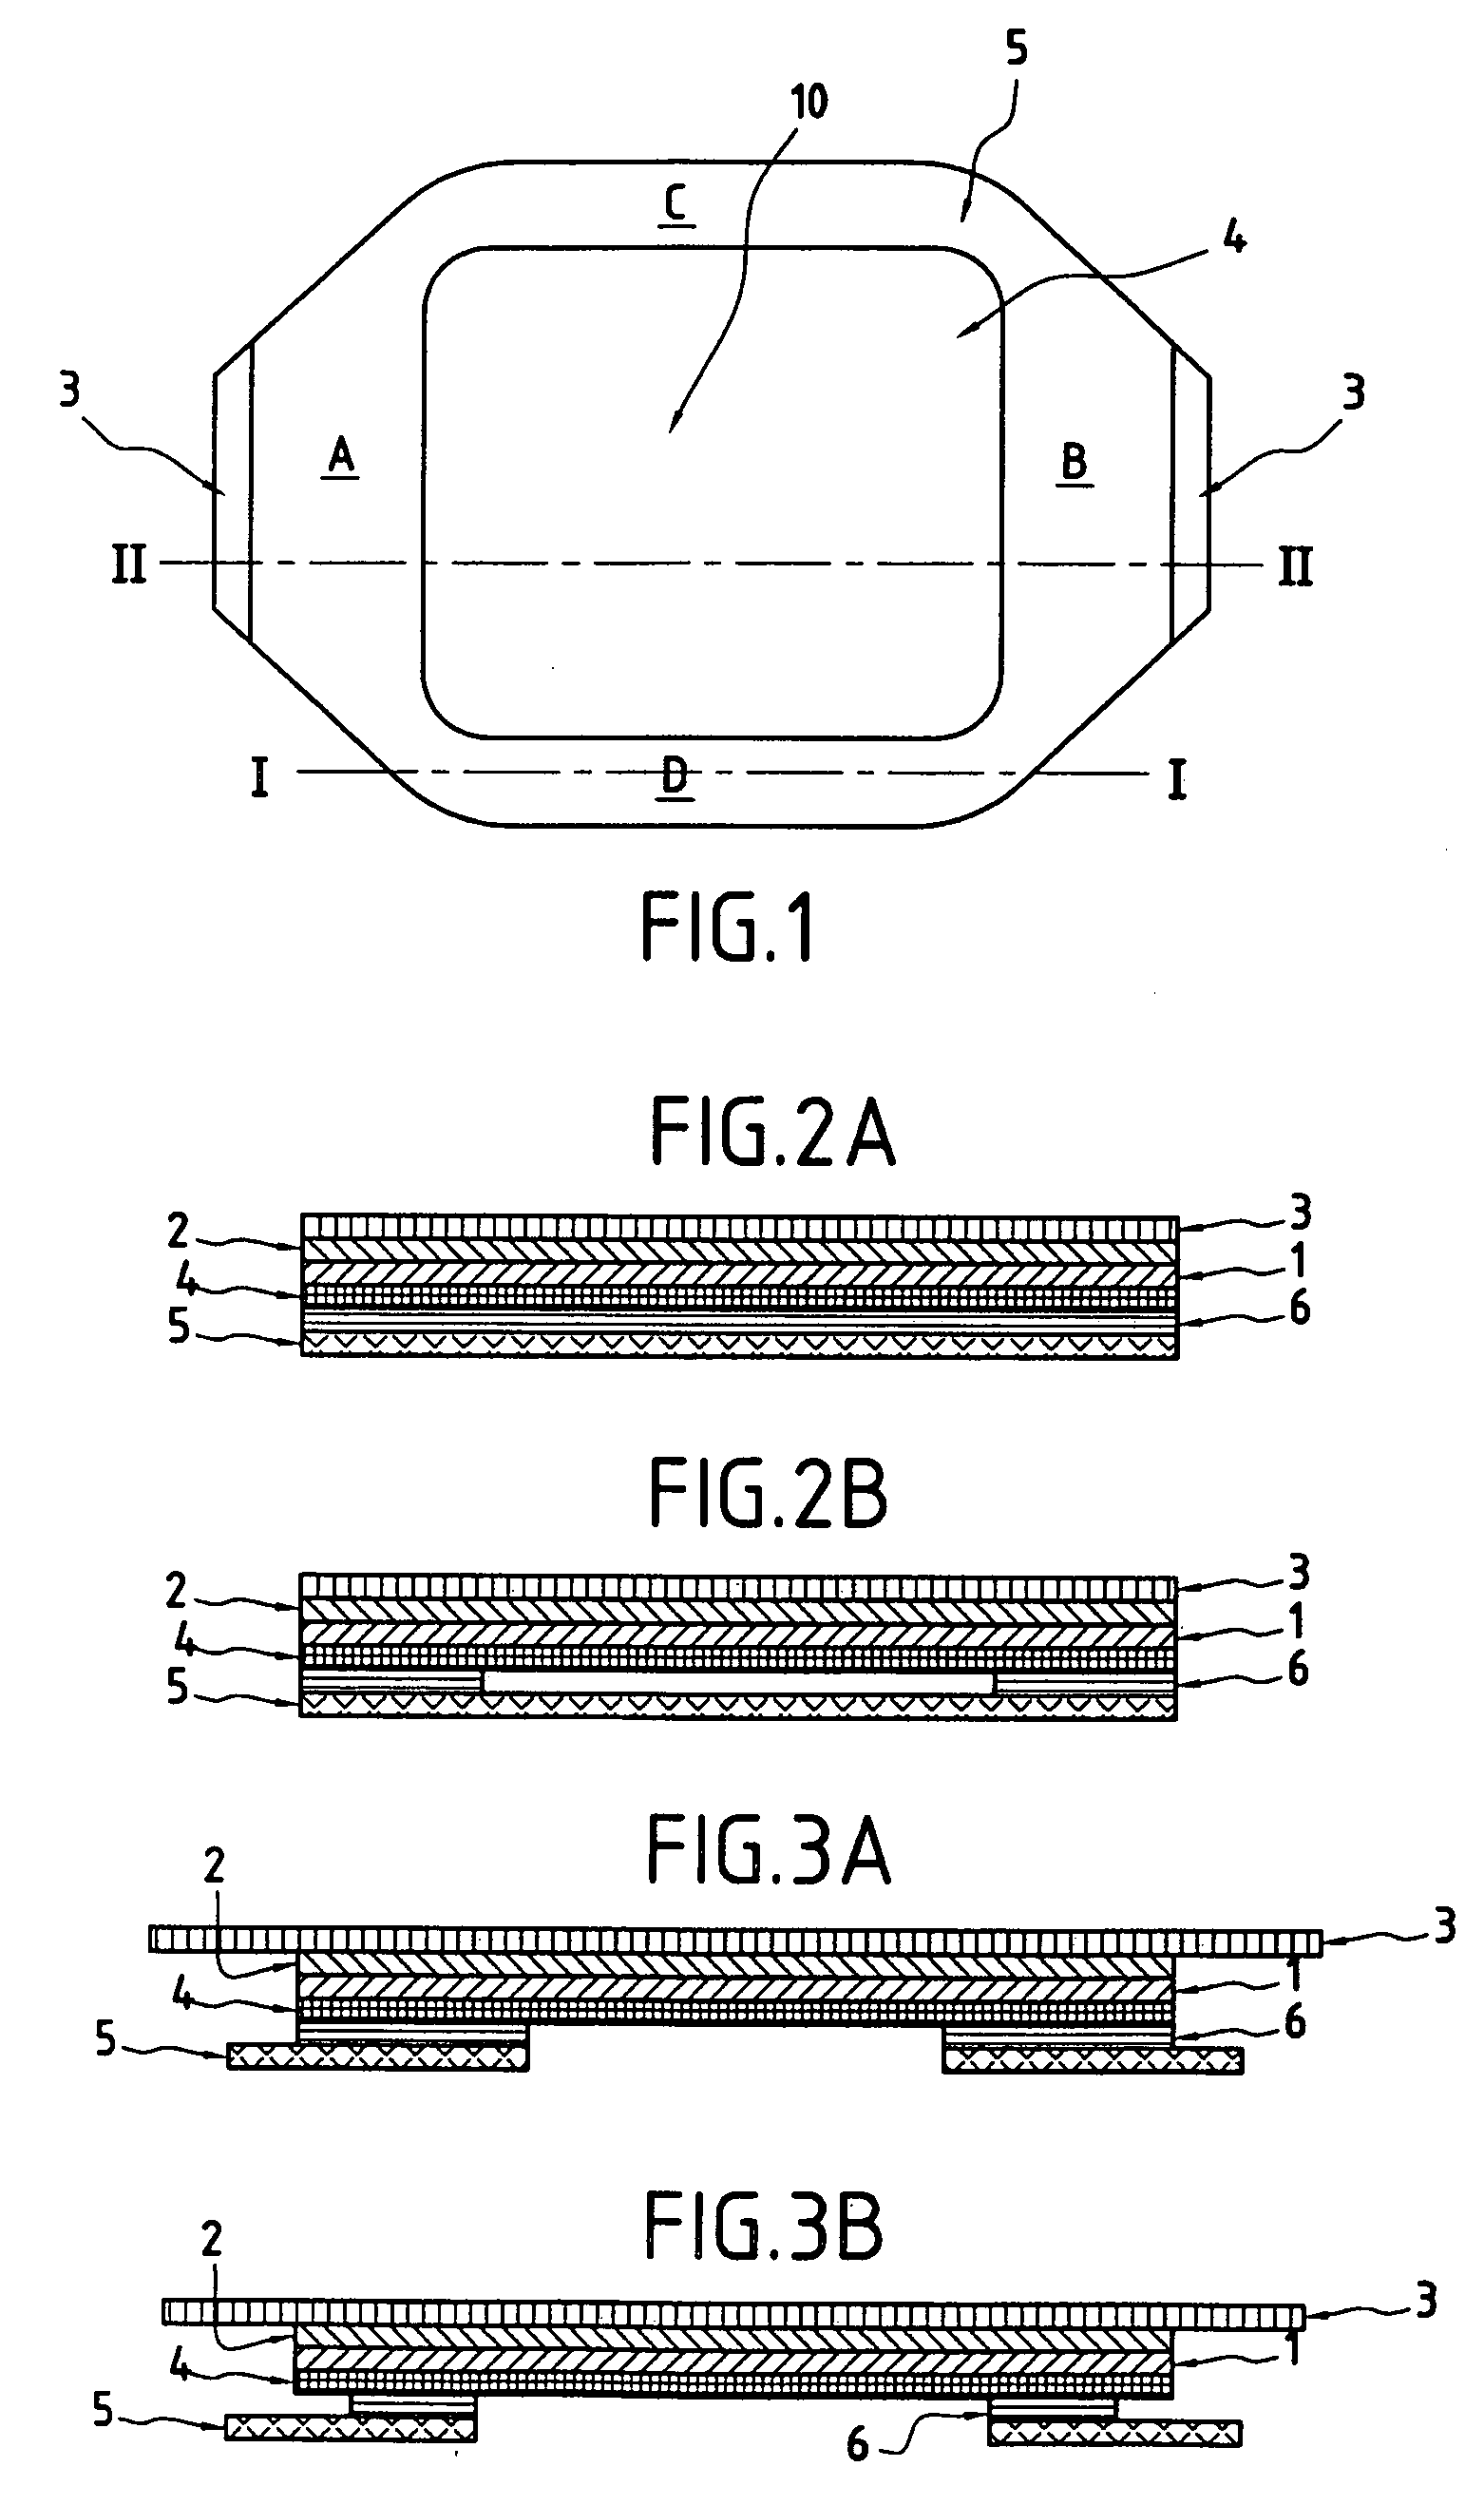 Dressing Provided With a Thin Film Applicator